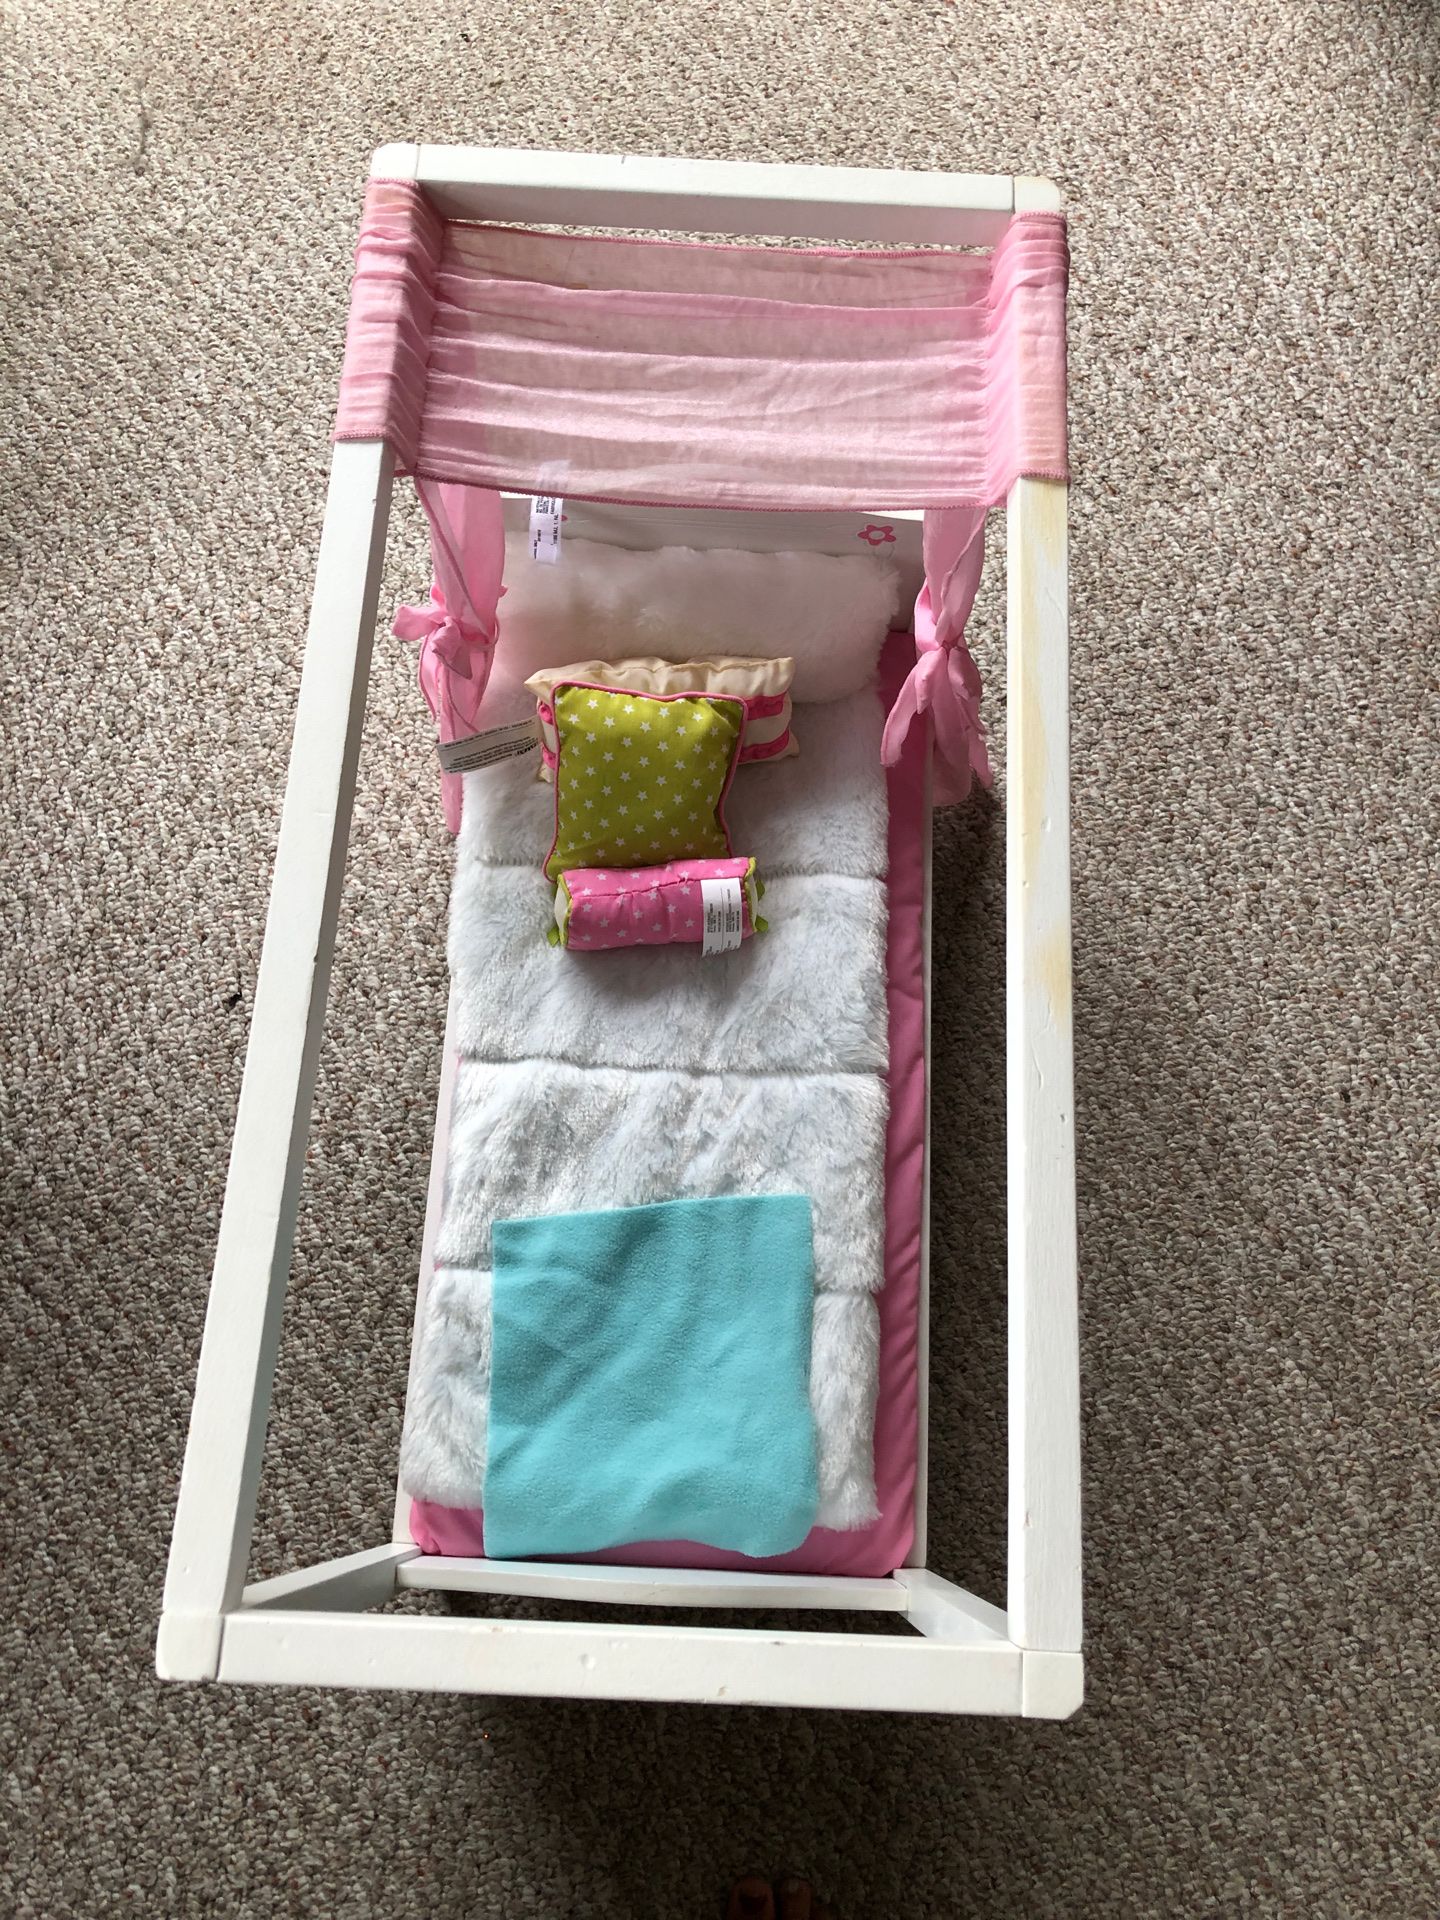 American girl doll bed